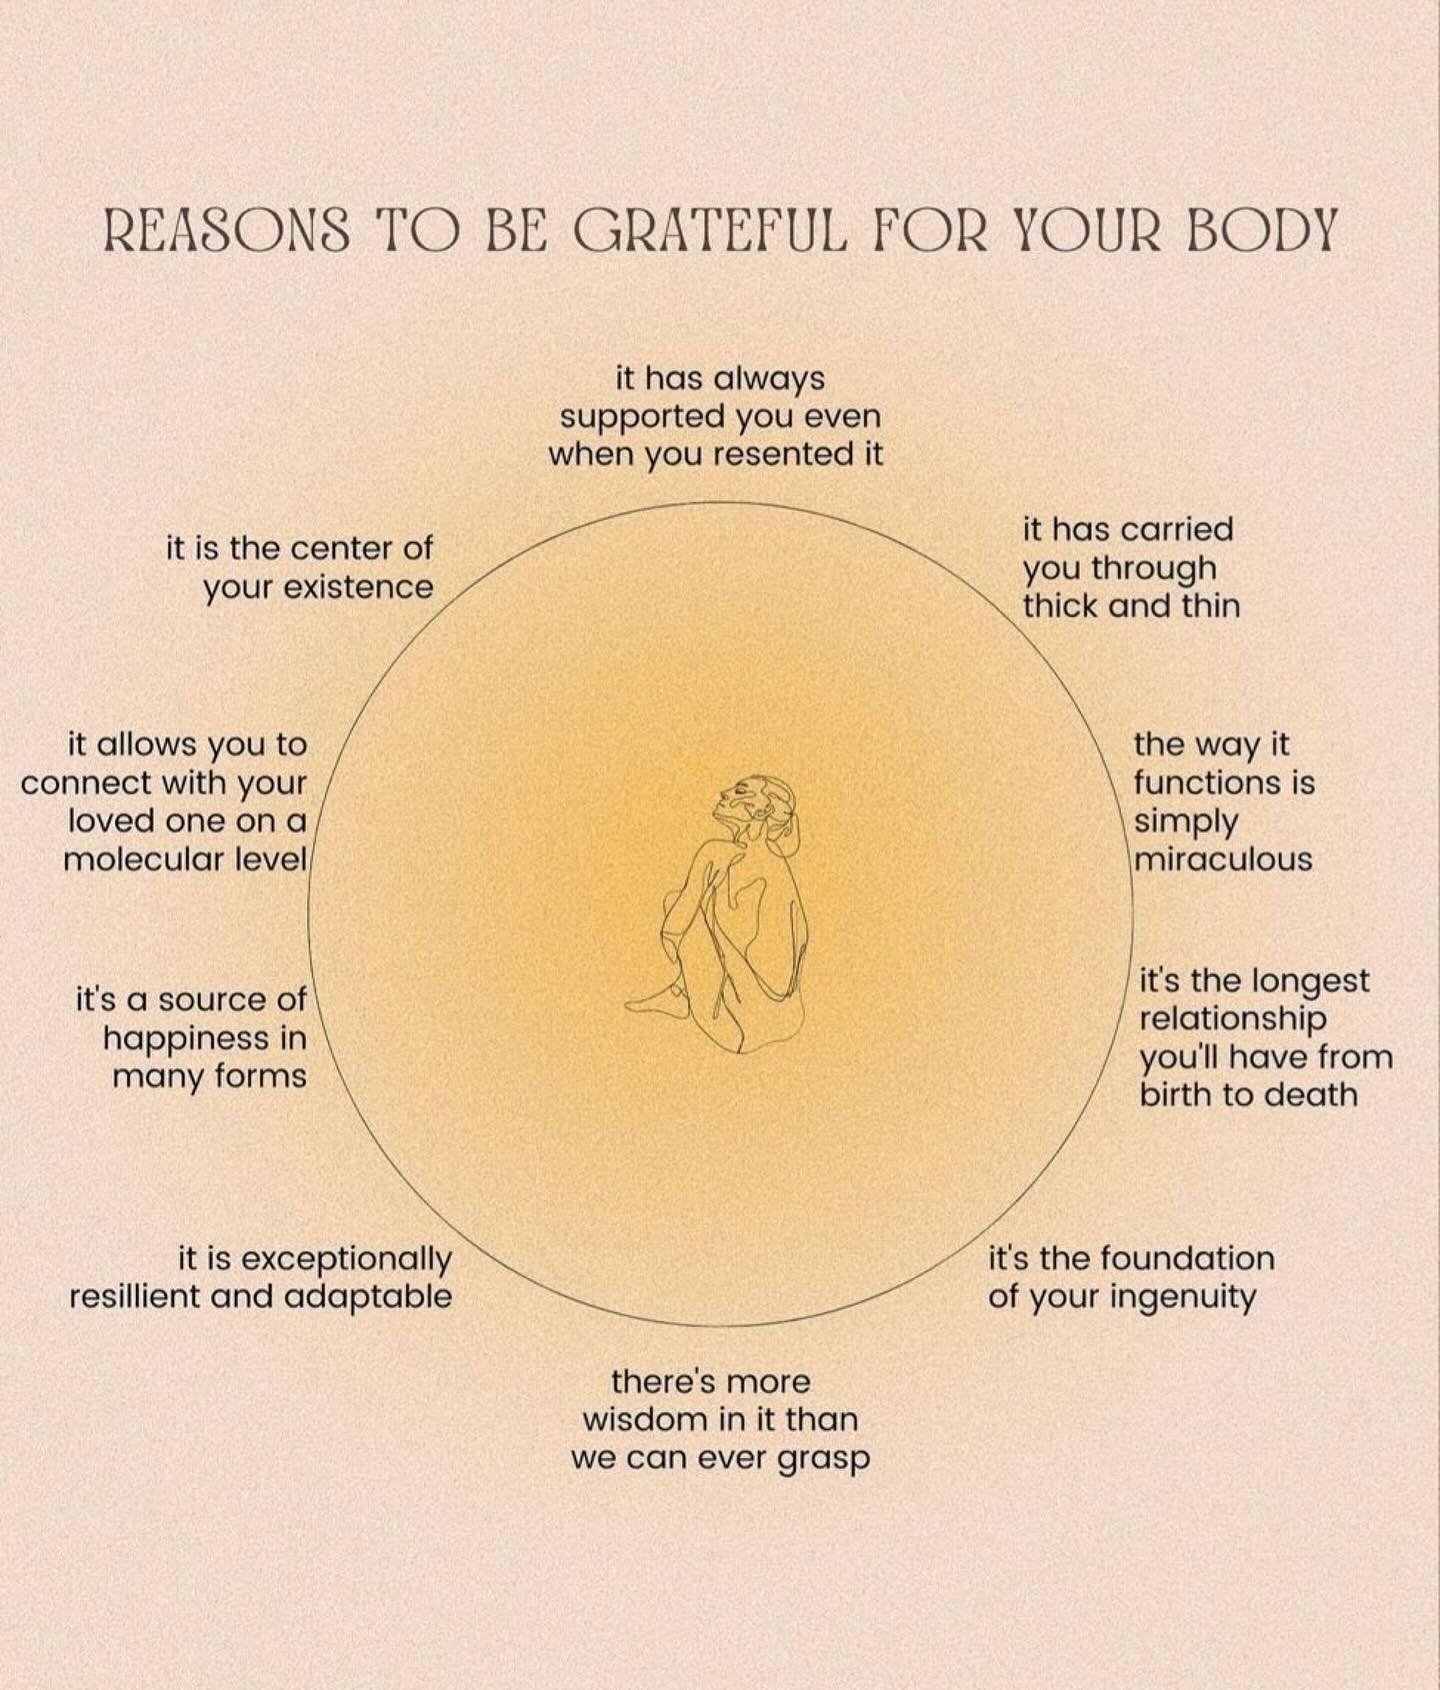 It&rsquo;s the only one we&rsquo;ve got&hellip;let&rsquo;s appreciate her and treat her like we would our most beloved friend/child/mother.
.
.
.
#bodypositivity #repost #iin